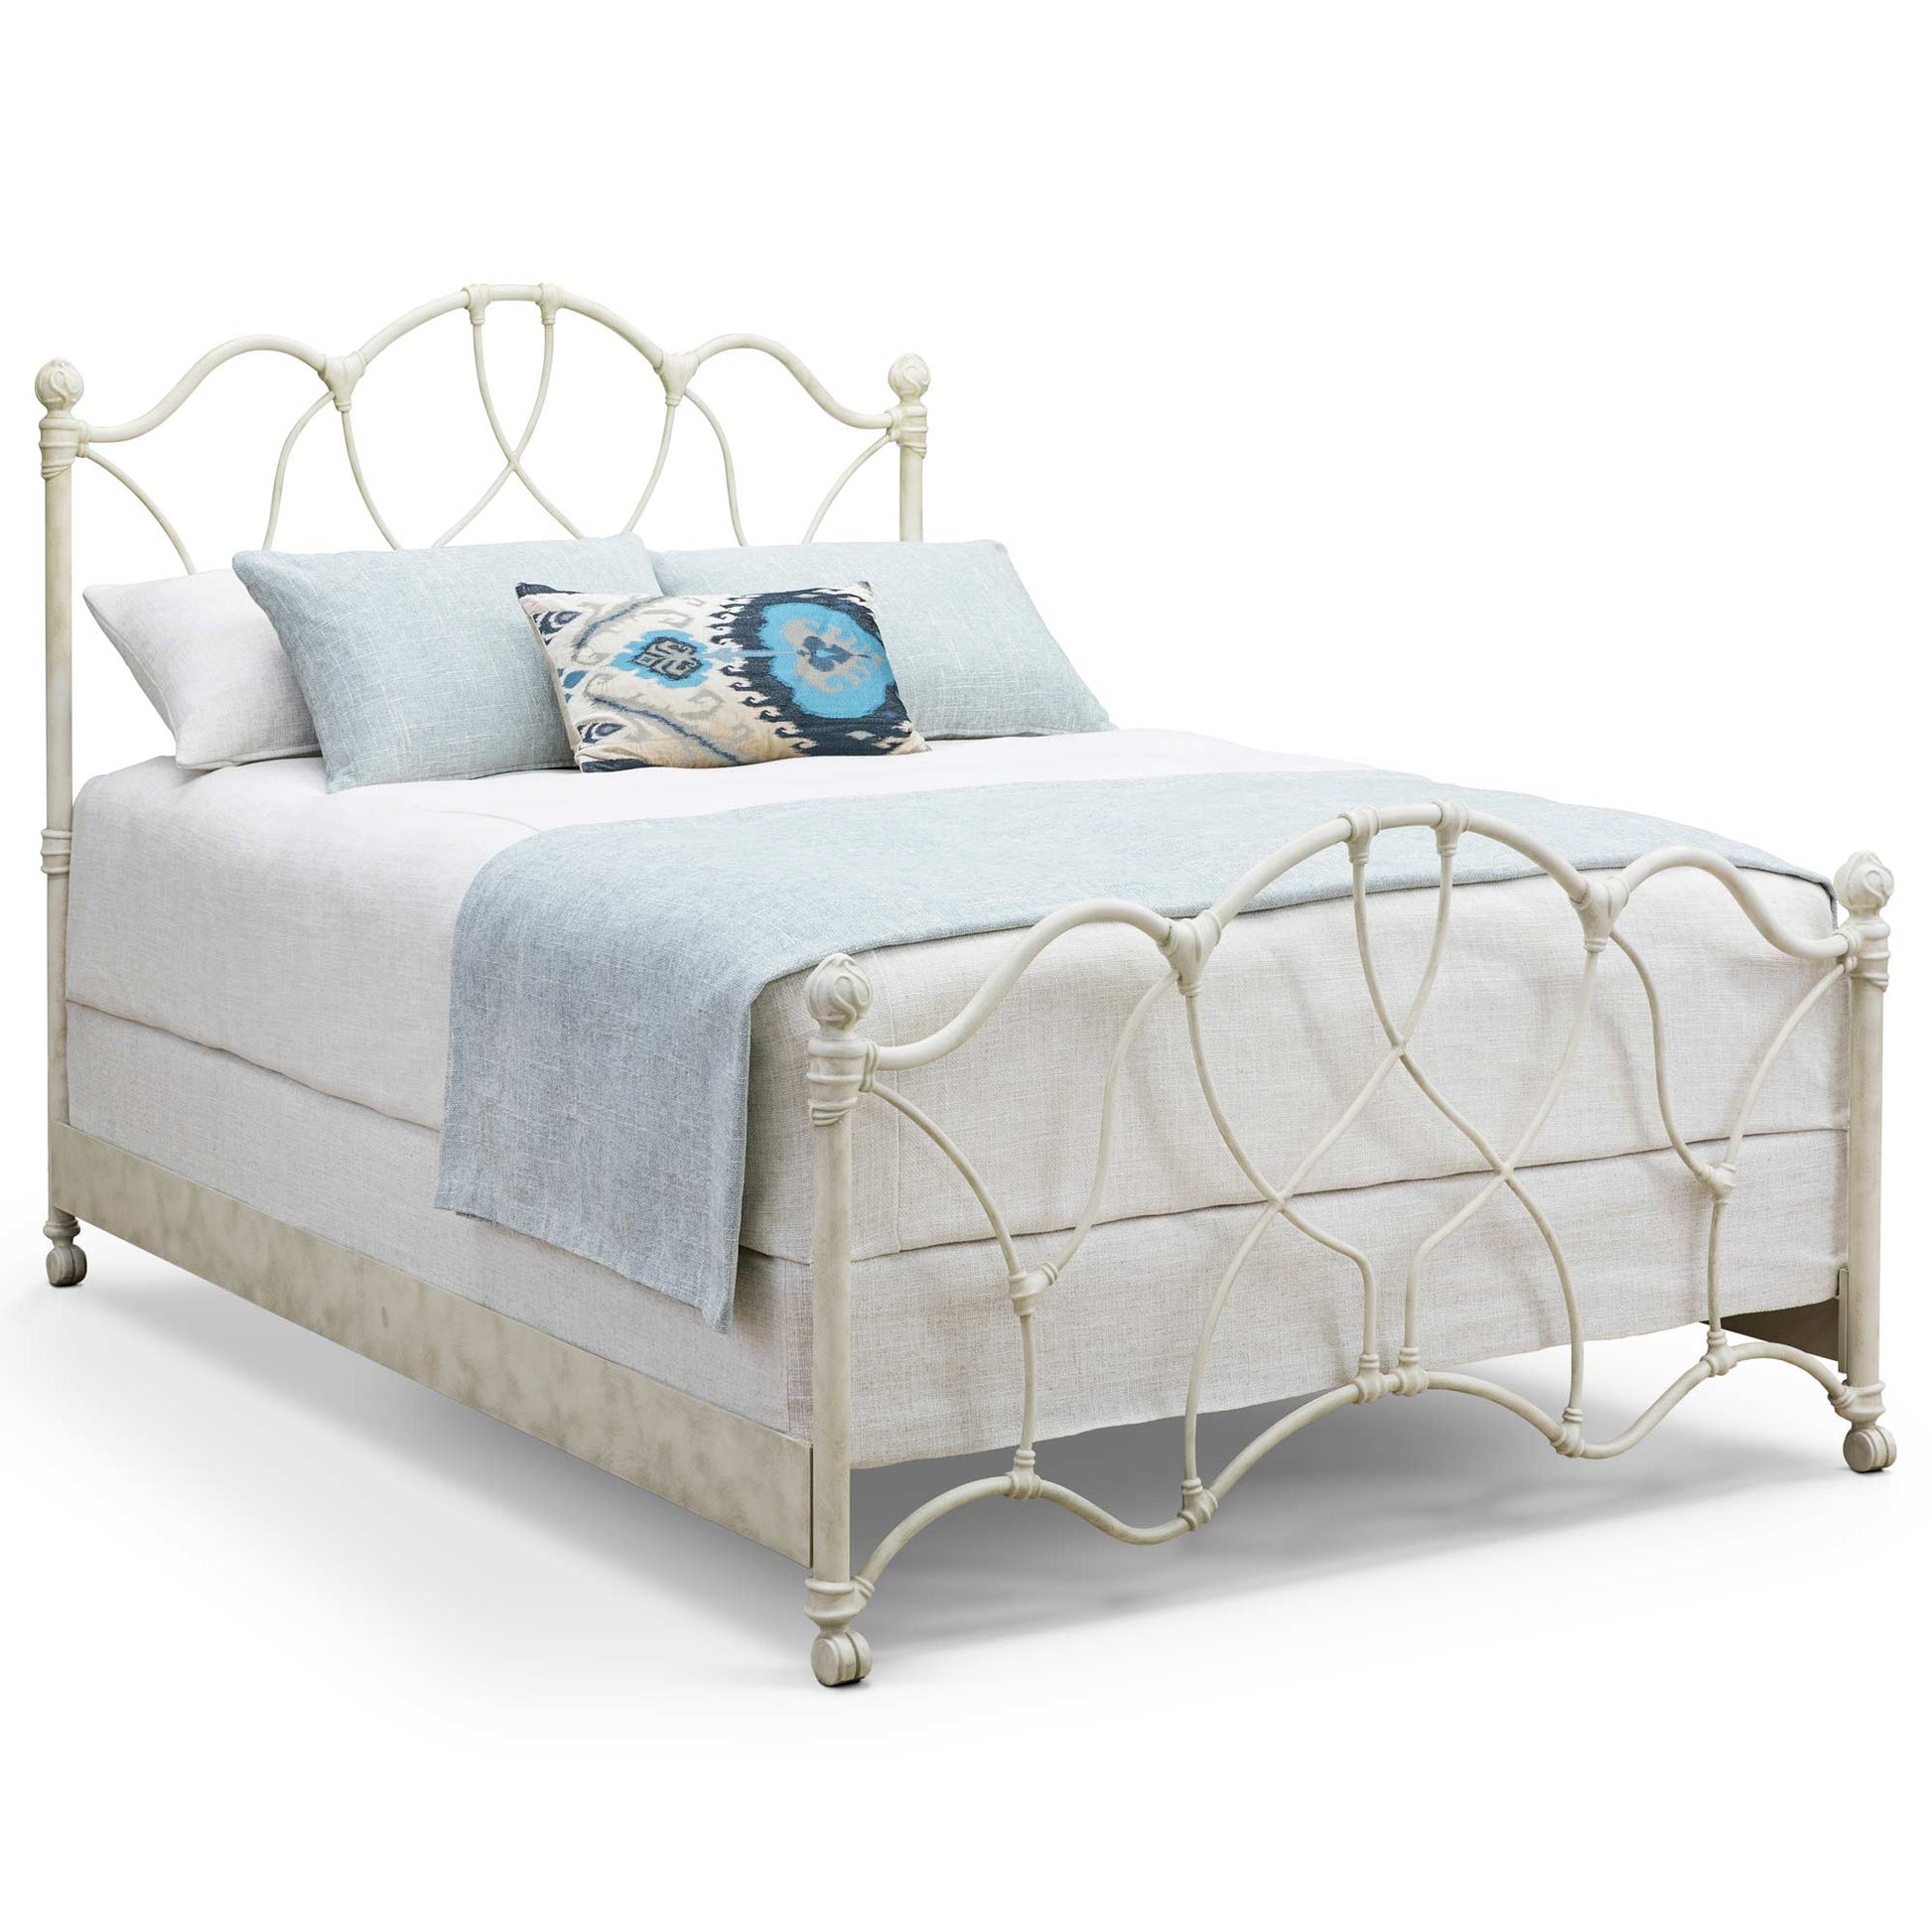 Morsley Iron Bed 1026 Wesley Allen Queen CBMPF Rustic Ivory Finish Matriae